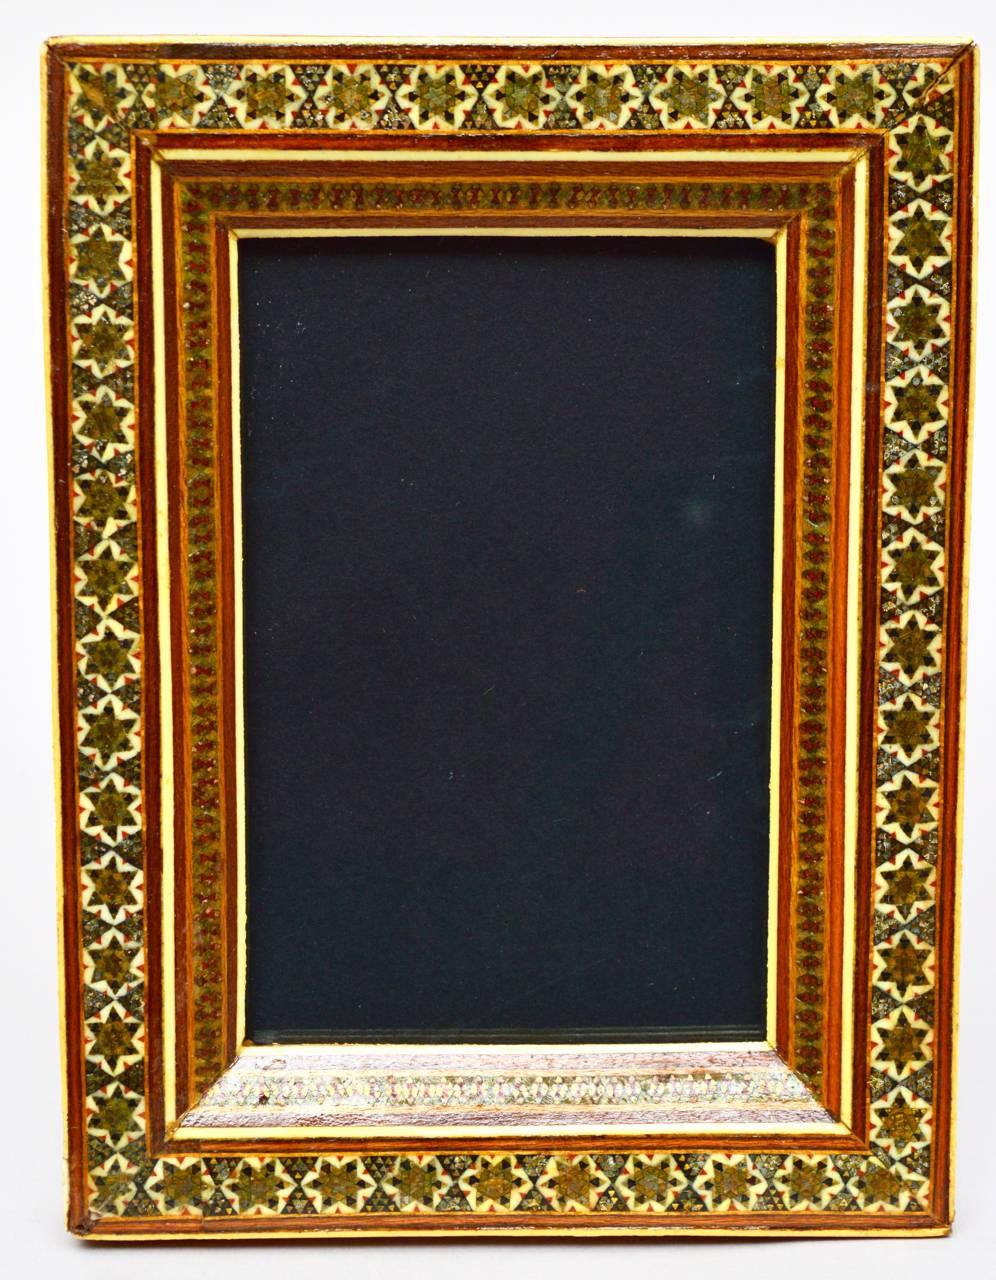 A very elegant Persian inlaid micro mosaic photo frame. Inlaid with wood, bone and metal. Ready for your photo or to give as a gift.